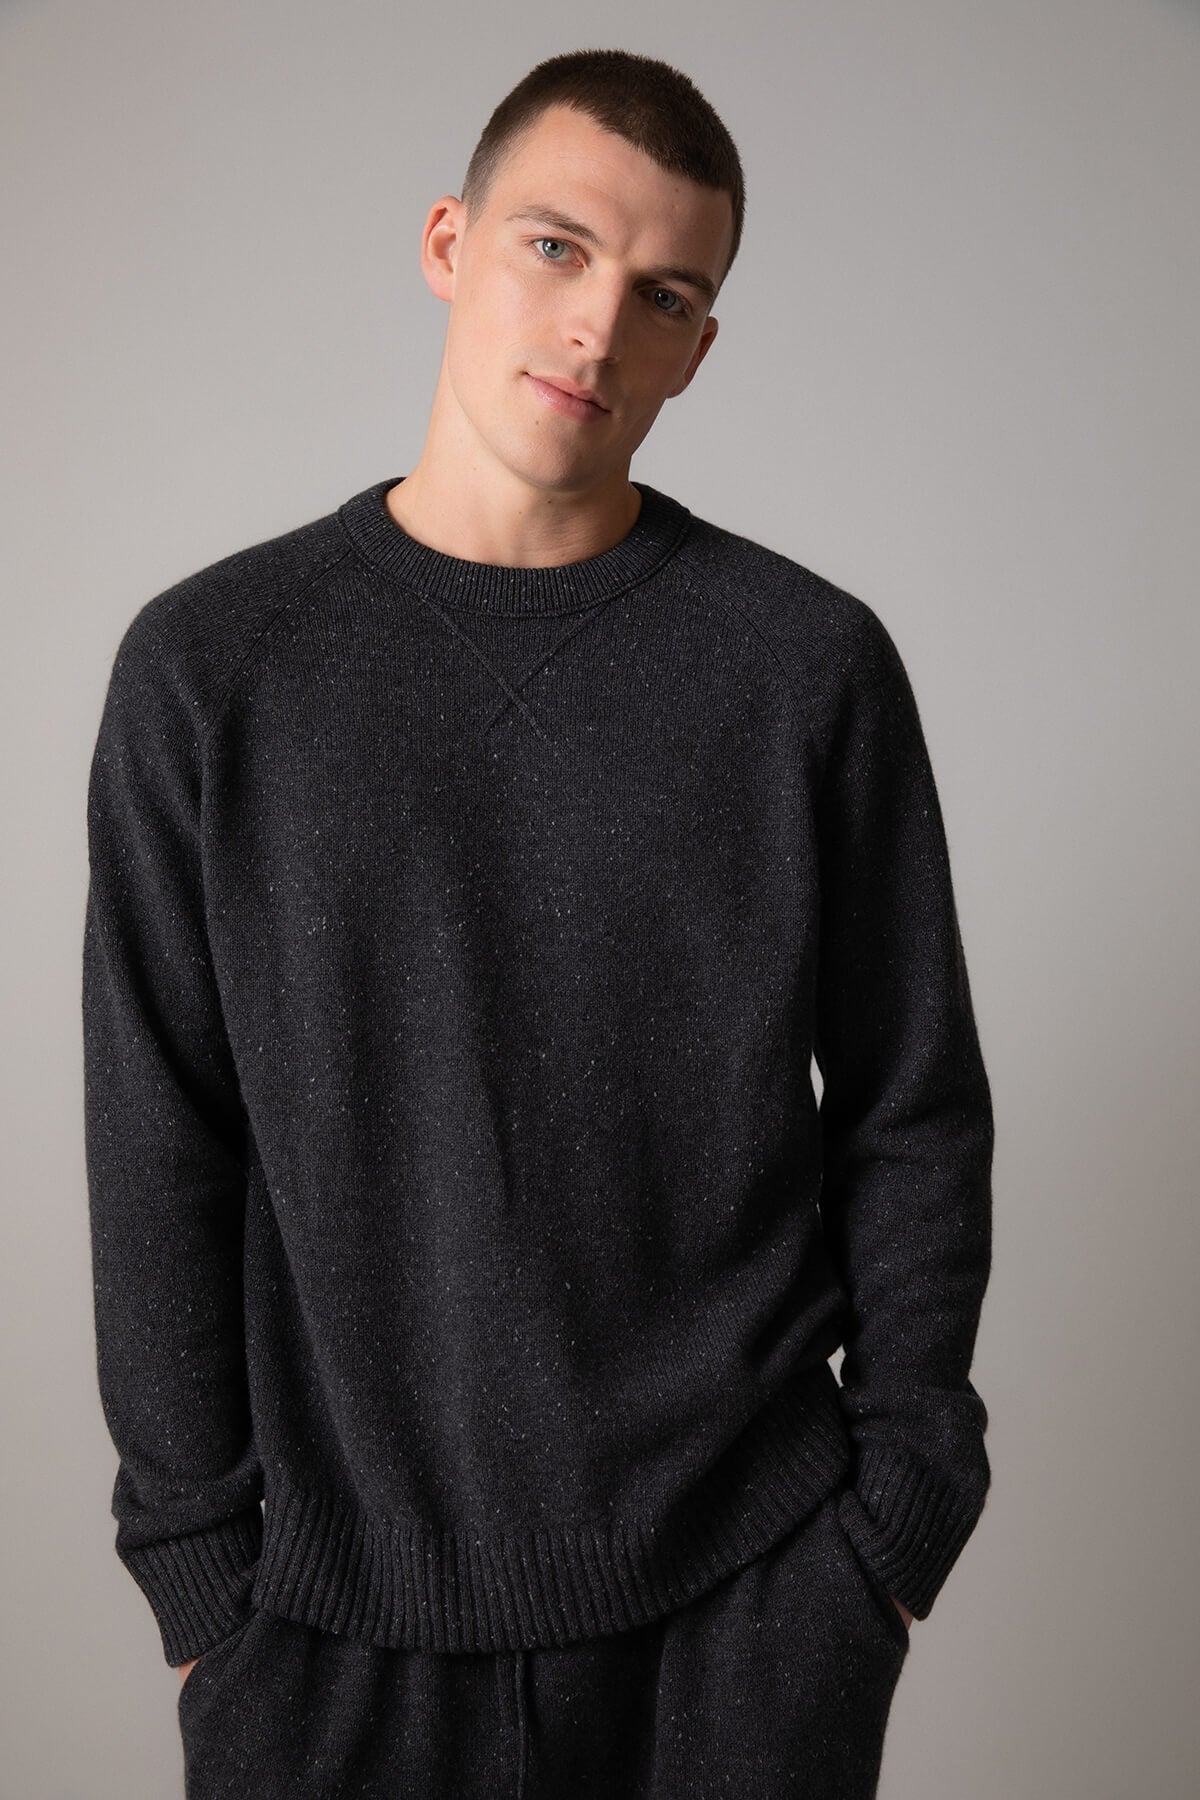 Johnstons of Elgin’s Men's Cashmere Donegal Sweatshirt in Charcoal grey on model wearing matching grey joggers on a grey background KAA05147004521